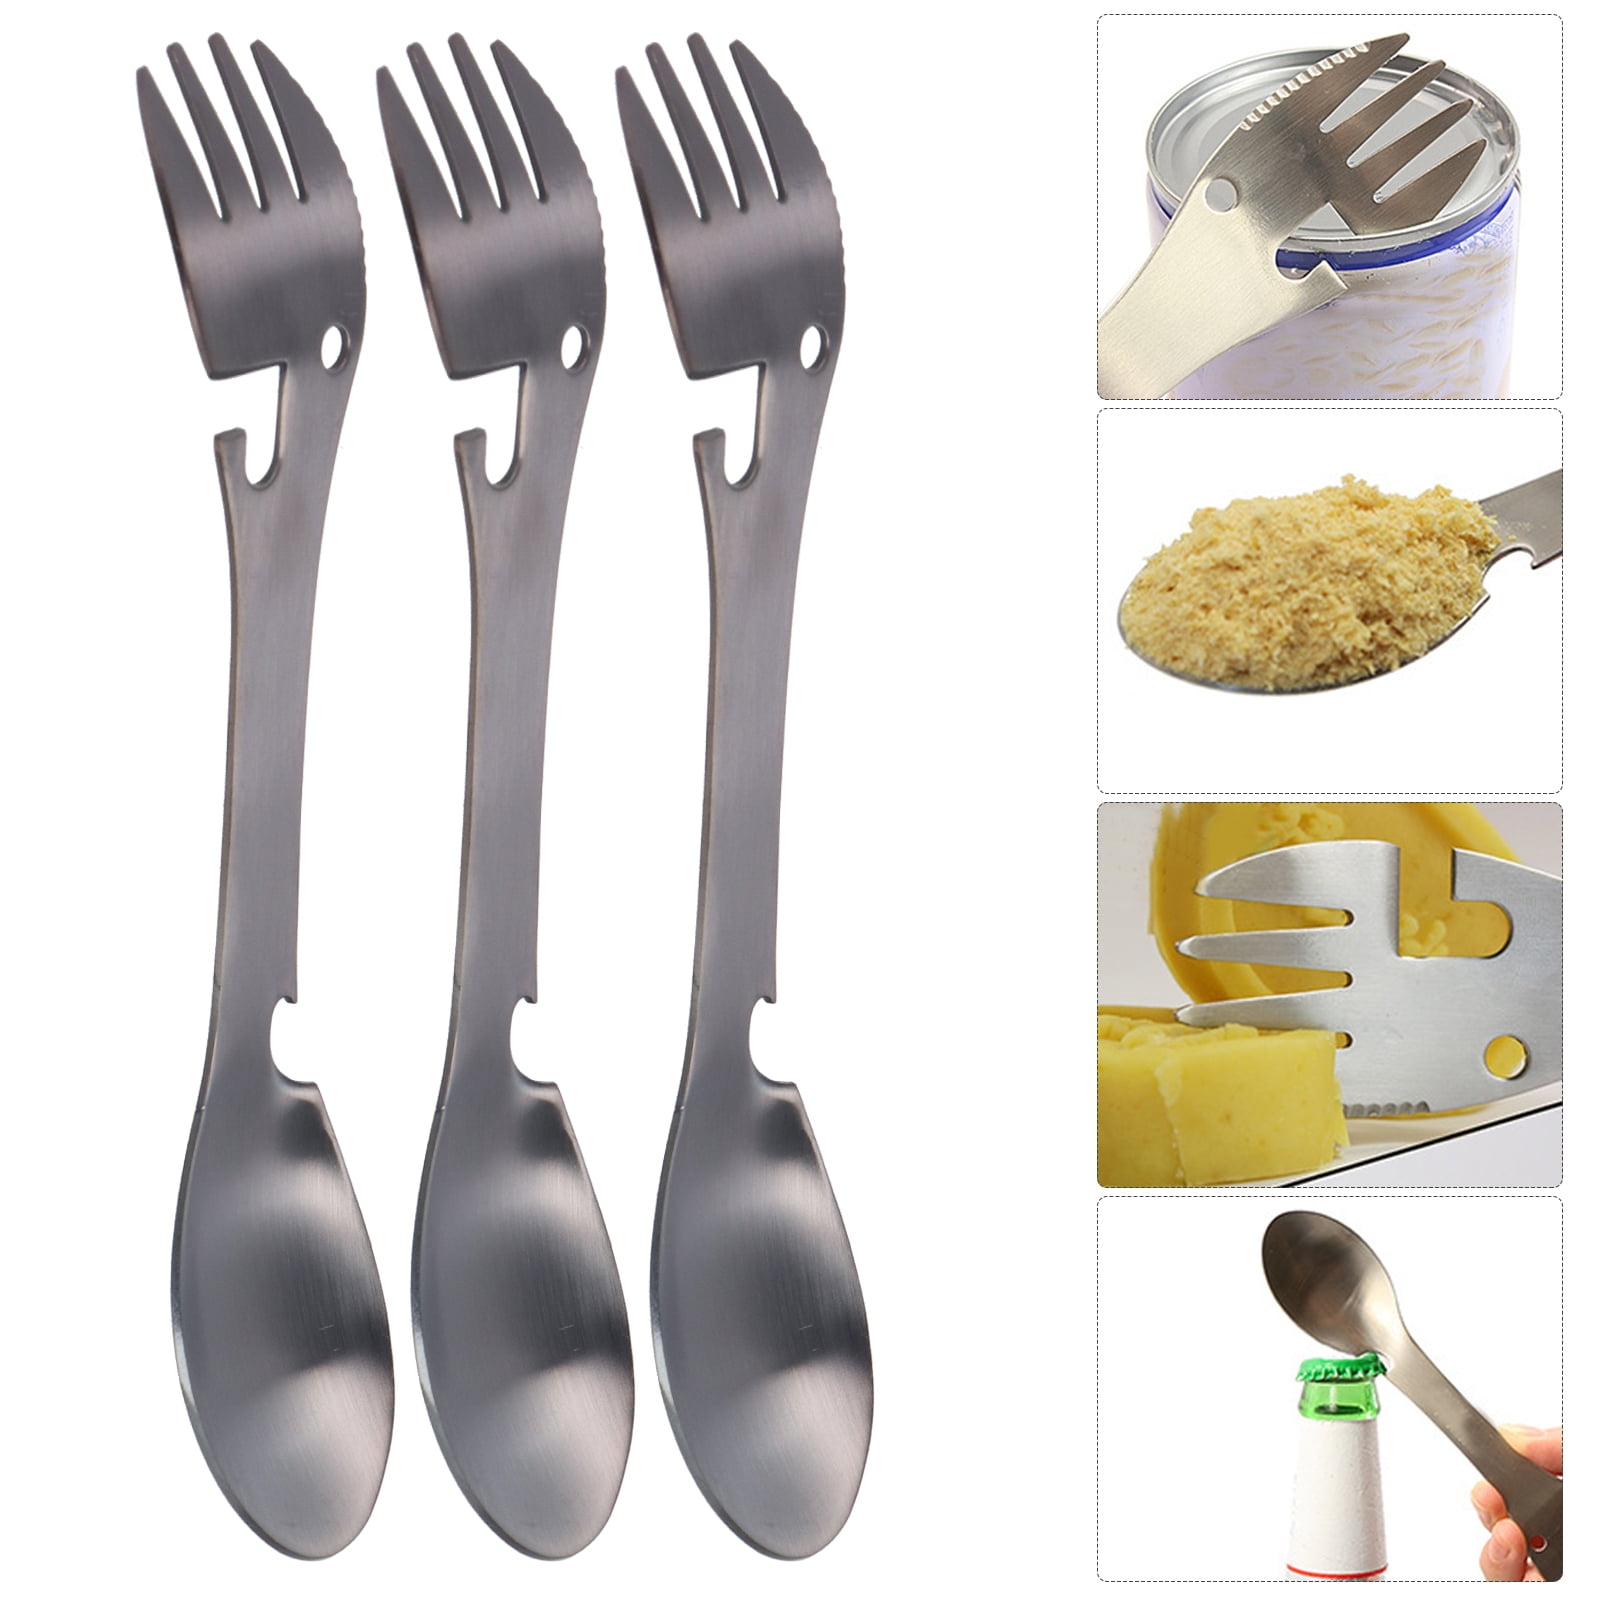 Details about   5 in 1 Outdoor CAMPING TOOL PICNIC FORK SPOON Lightweight Stainless Steel